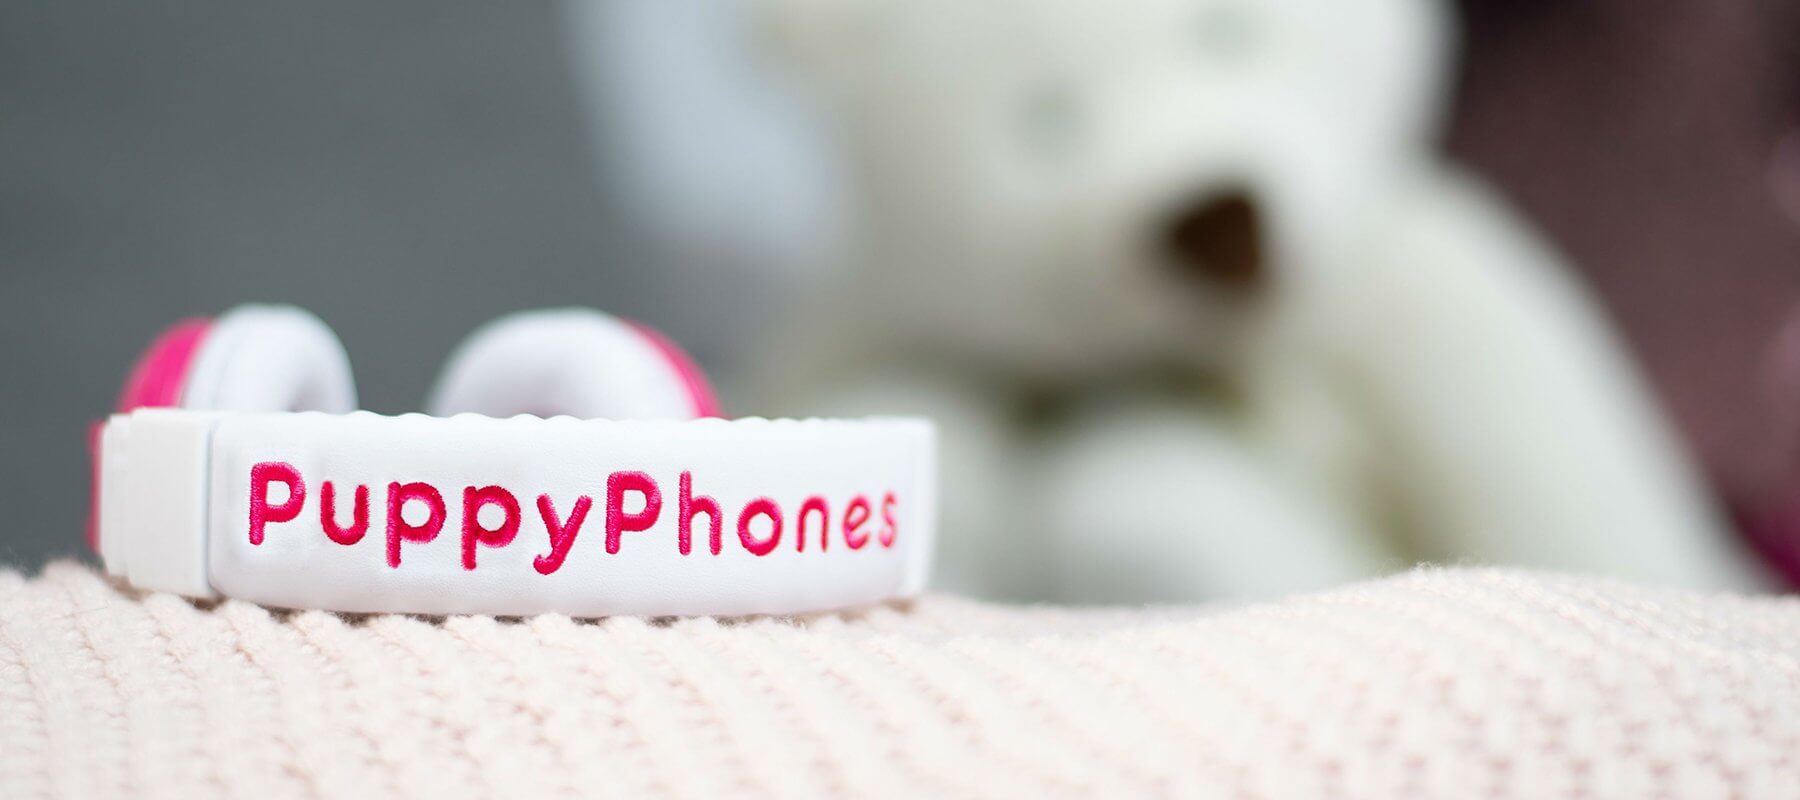 Introducing PuppyPhones - The World's First Safe Headphones for Pets!